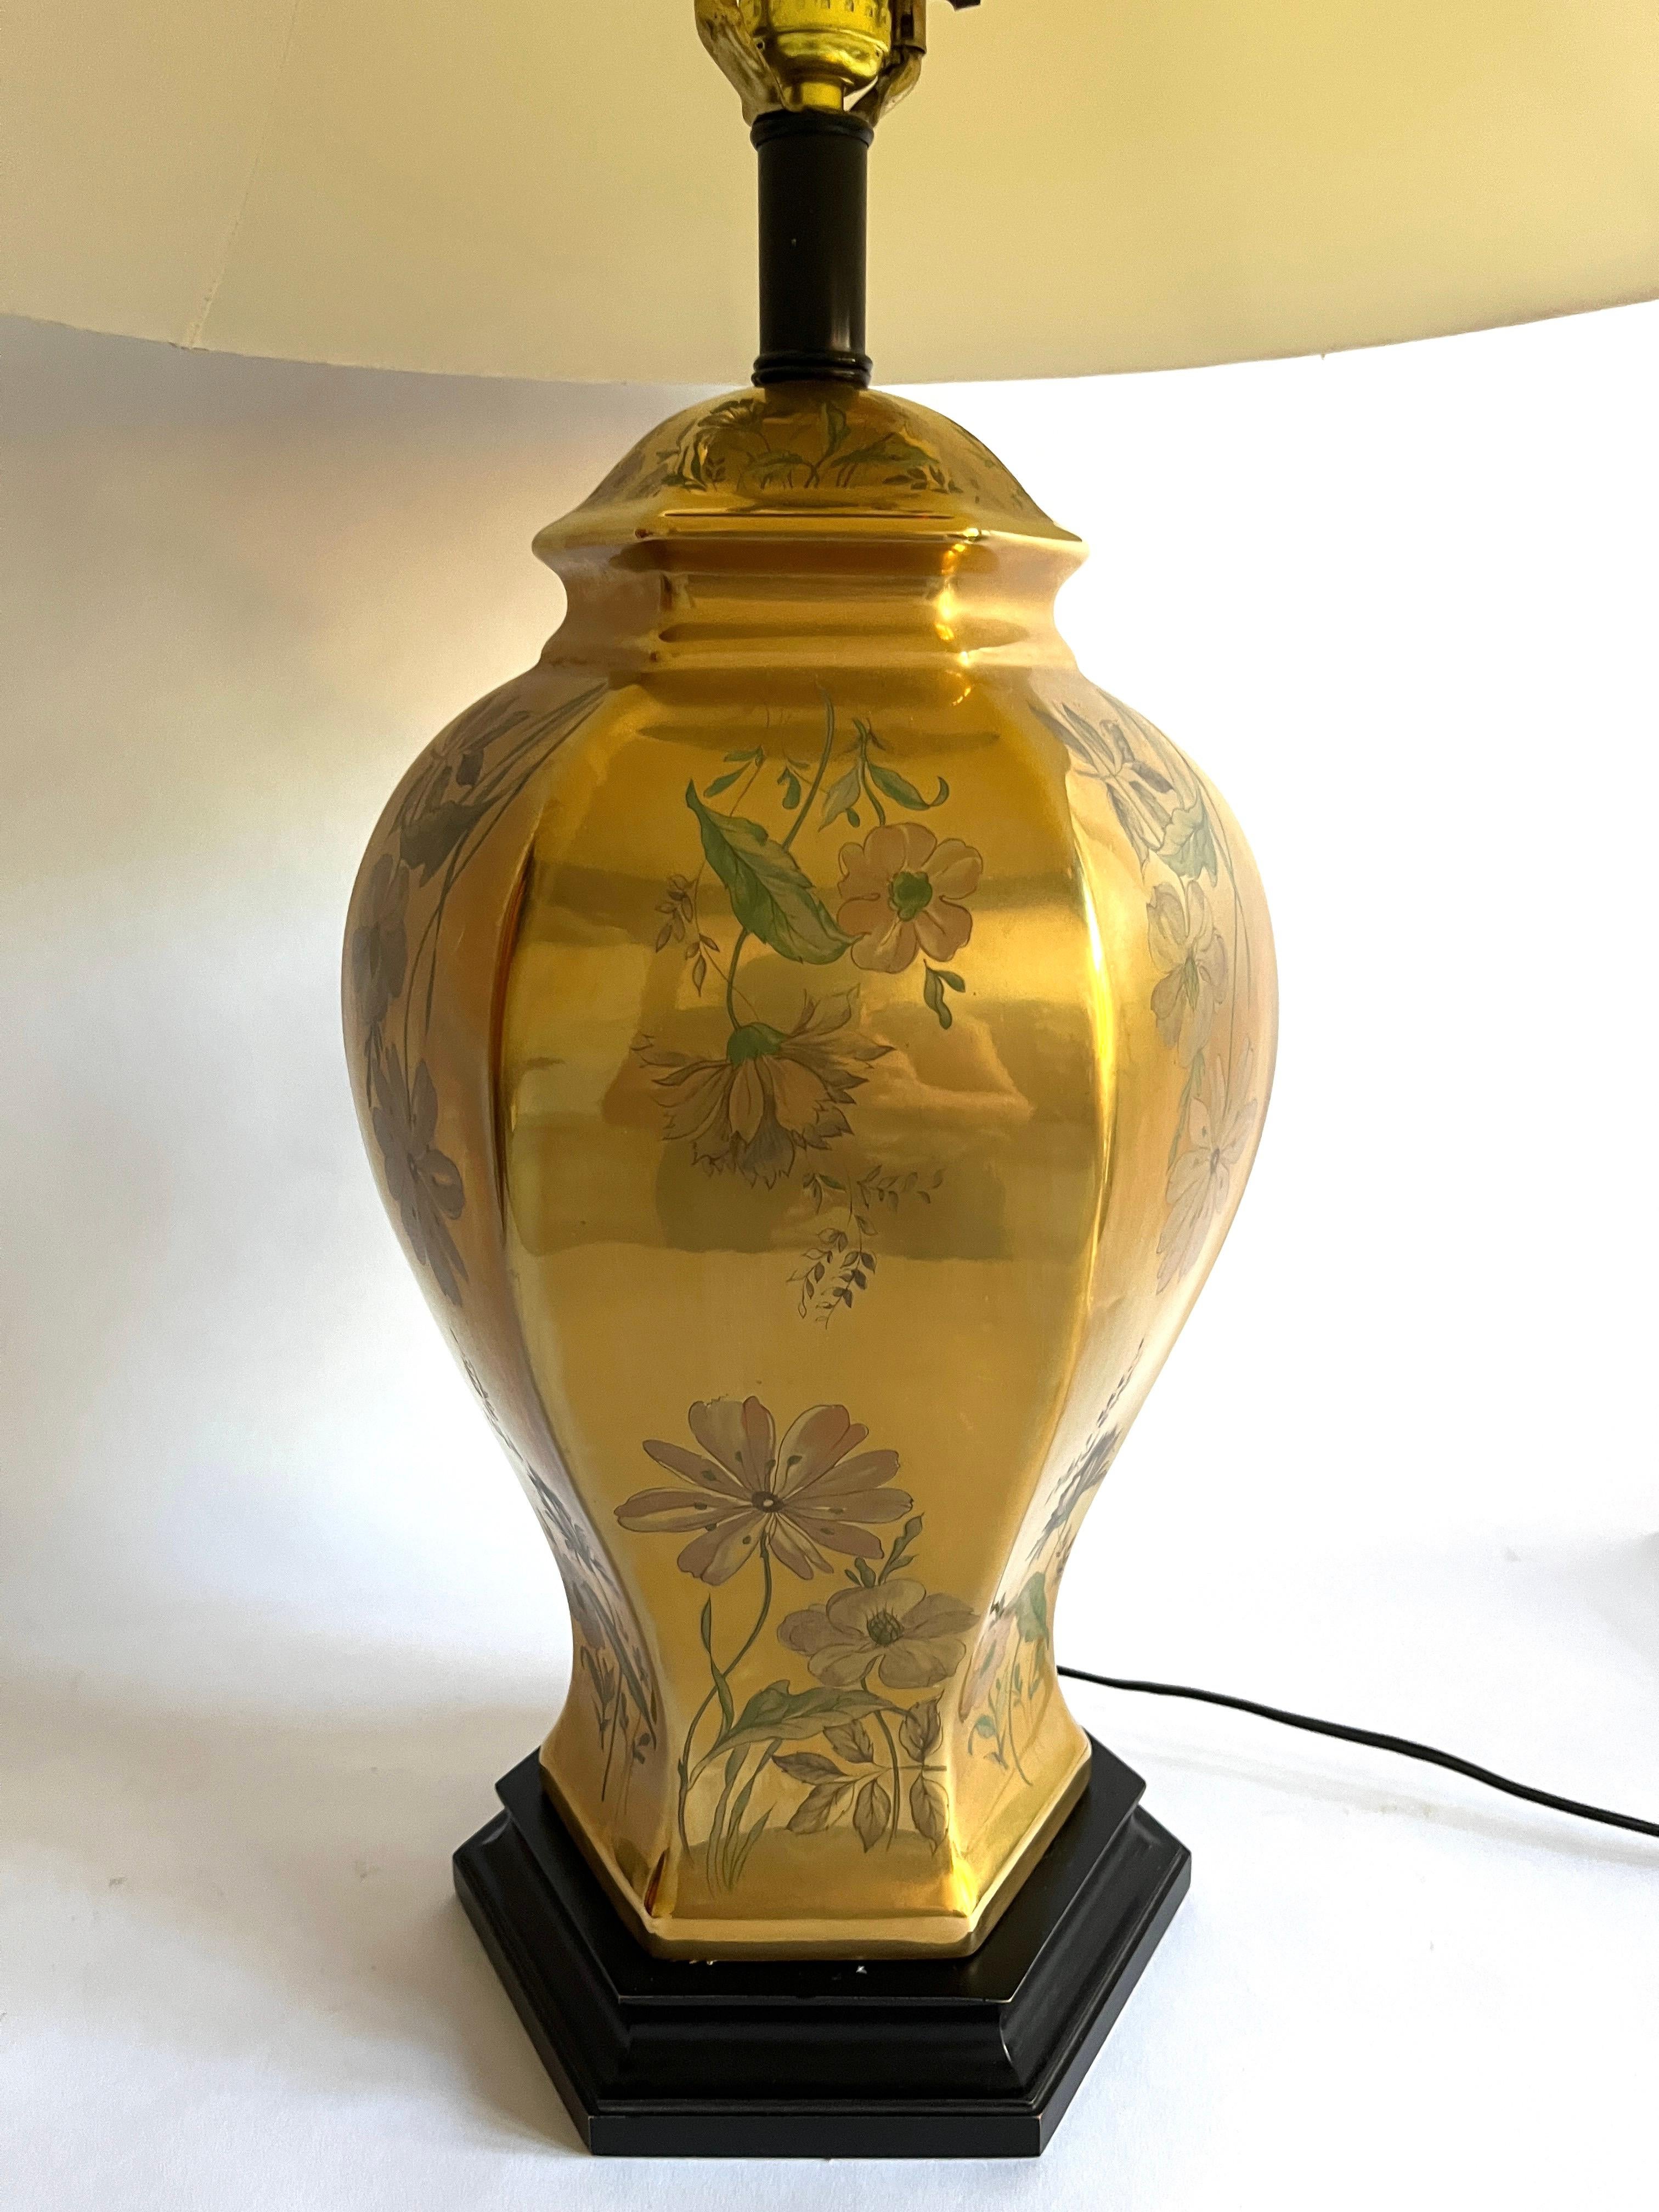 American Gold Porcelain Floral Hand-Painted Morris Greenspan Chinoiserie Urn Table Lamp For Sale